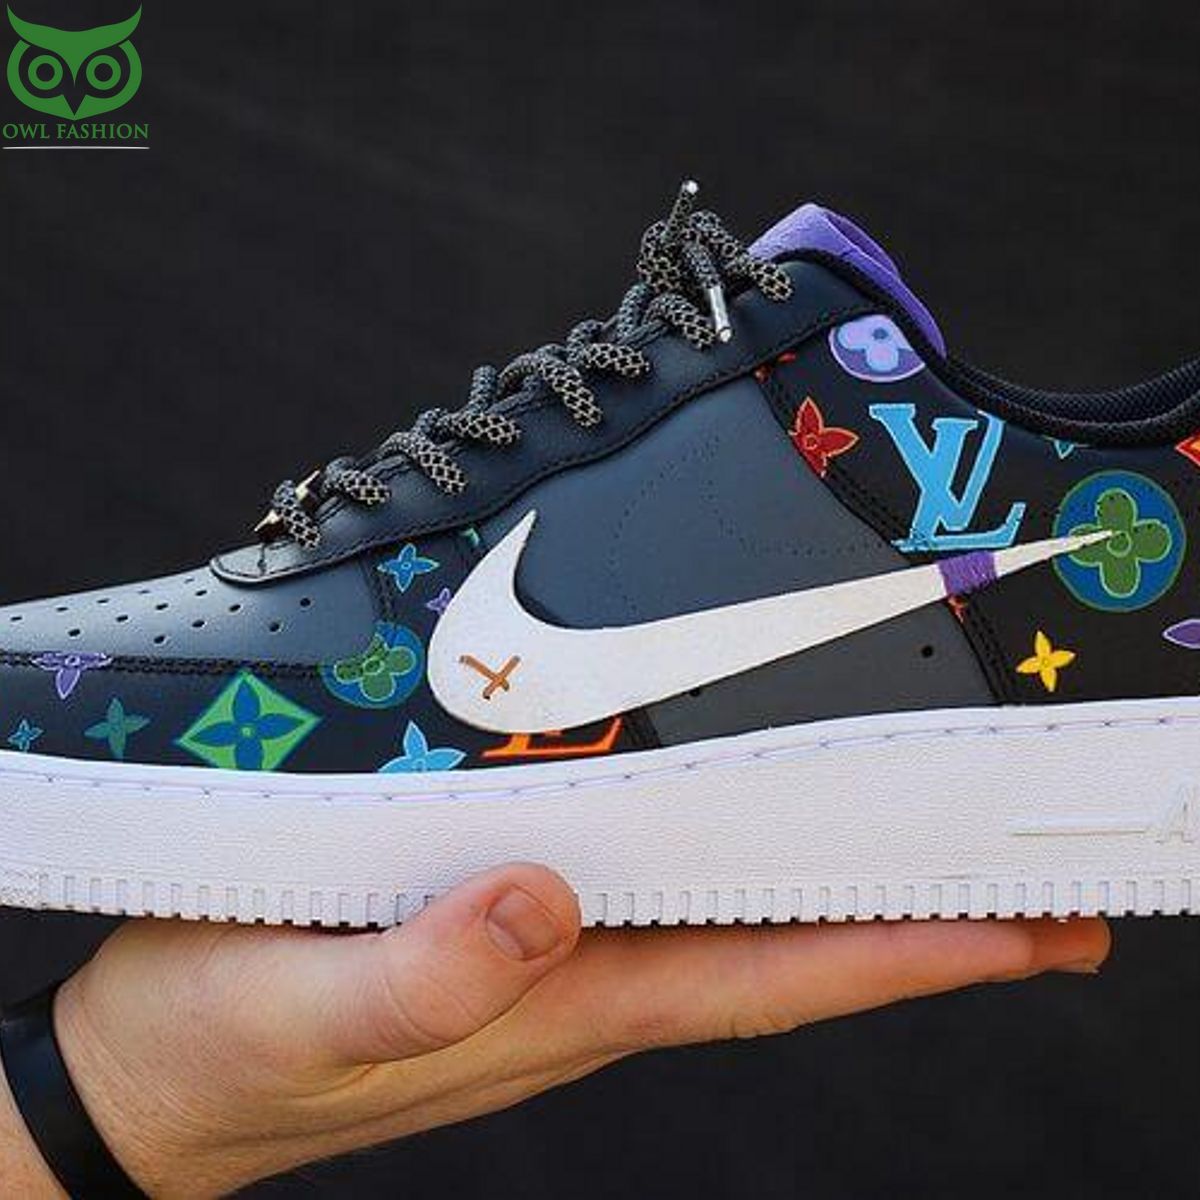 Multicolored Louis Vuitton Nike Air Force 1's